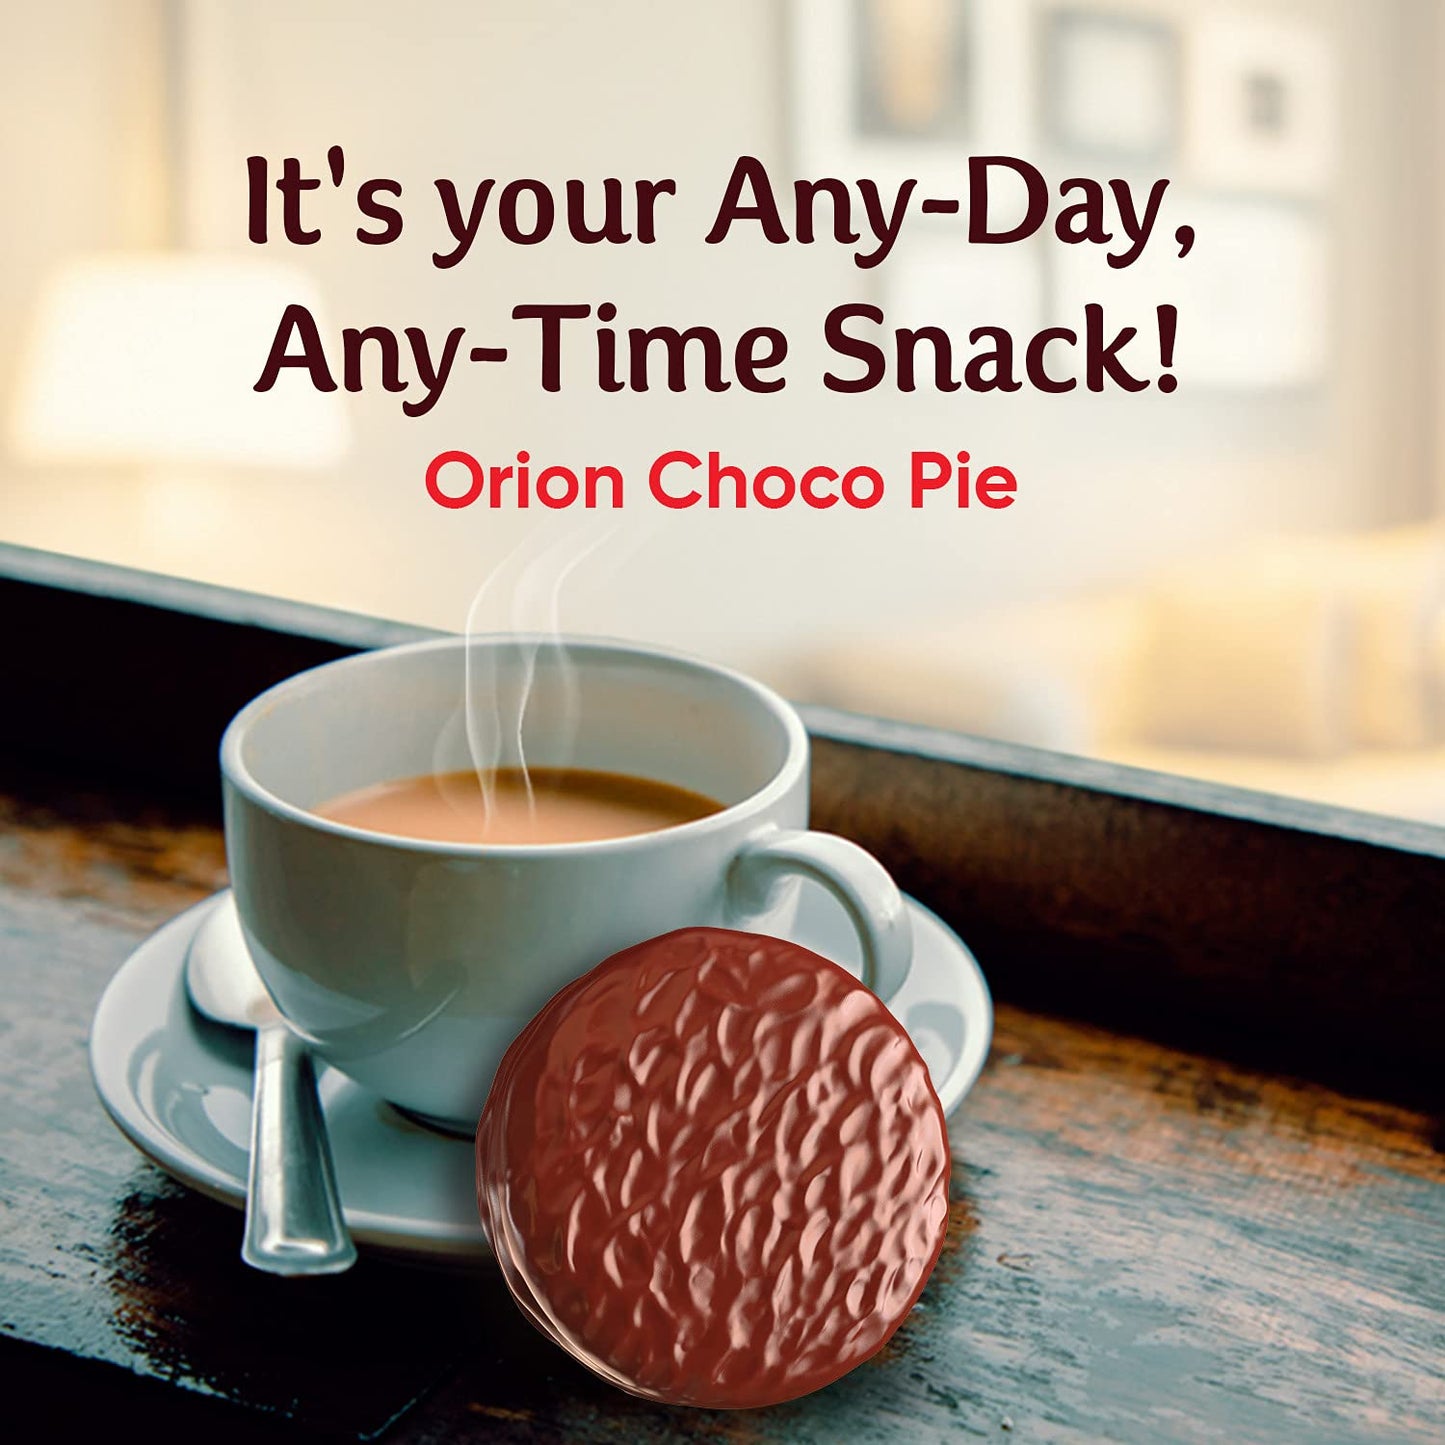 Orion Choco Pie - Chocolate Coated Soft Biscuit (12 Pies)